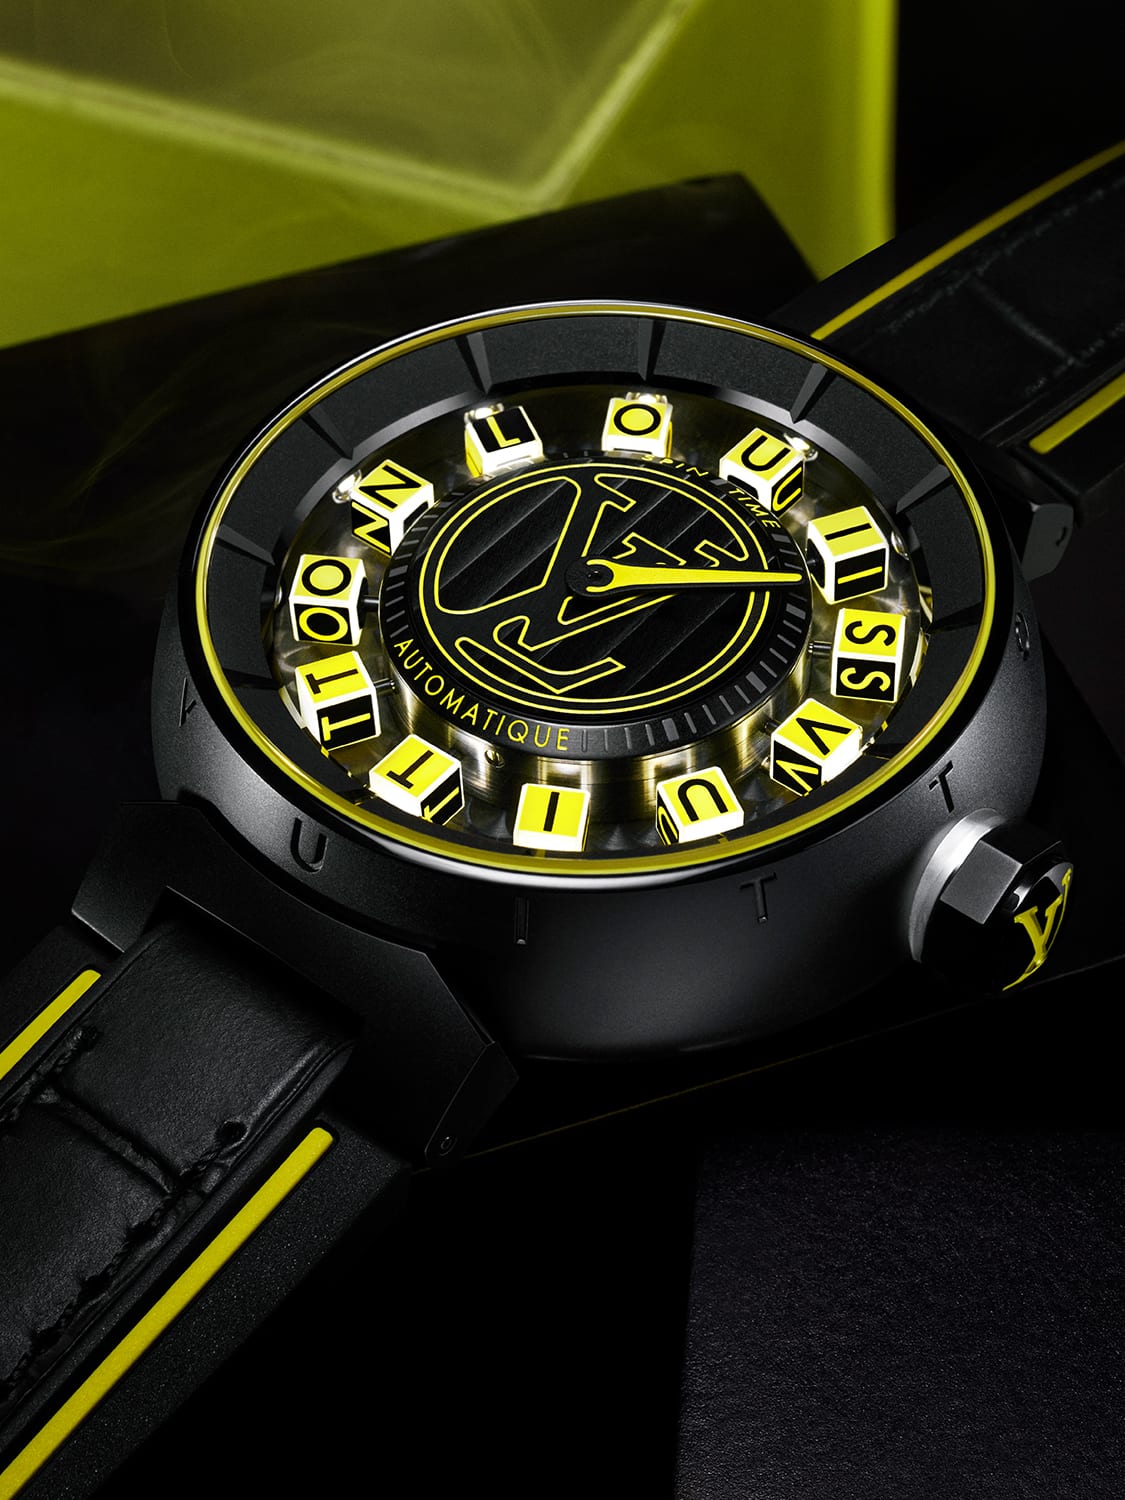 Louis Vuitton's new skull-and-snake watch wants you to stare death in the  face - CNA